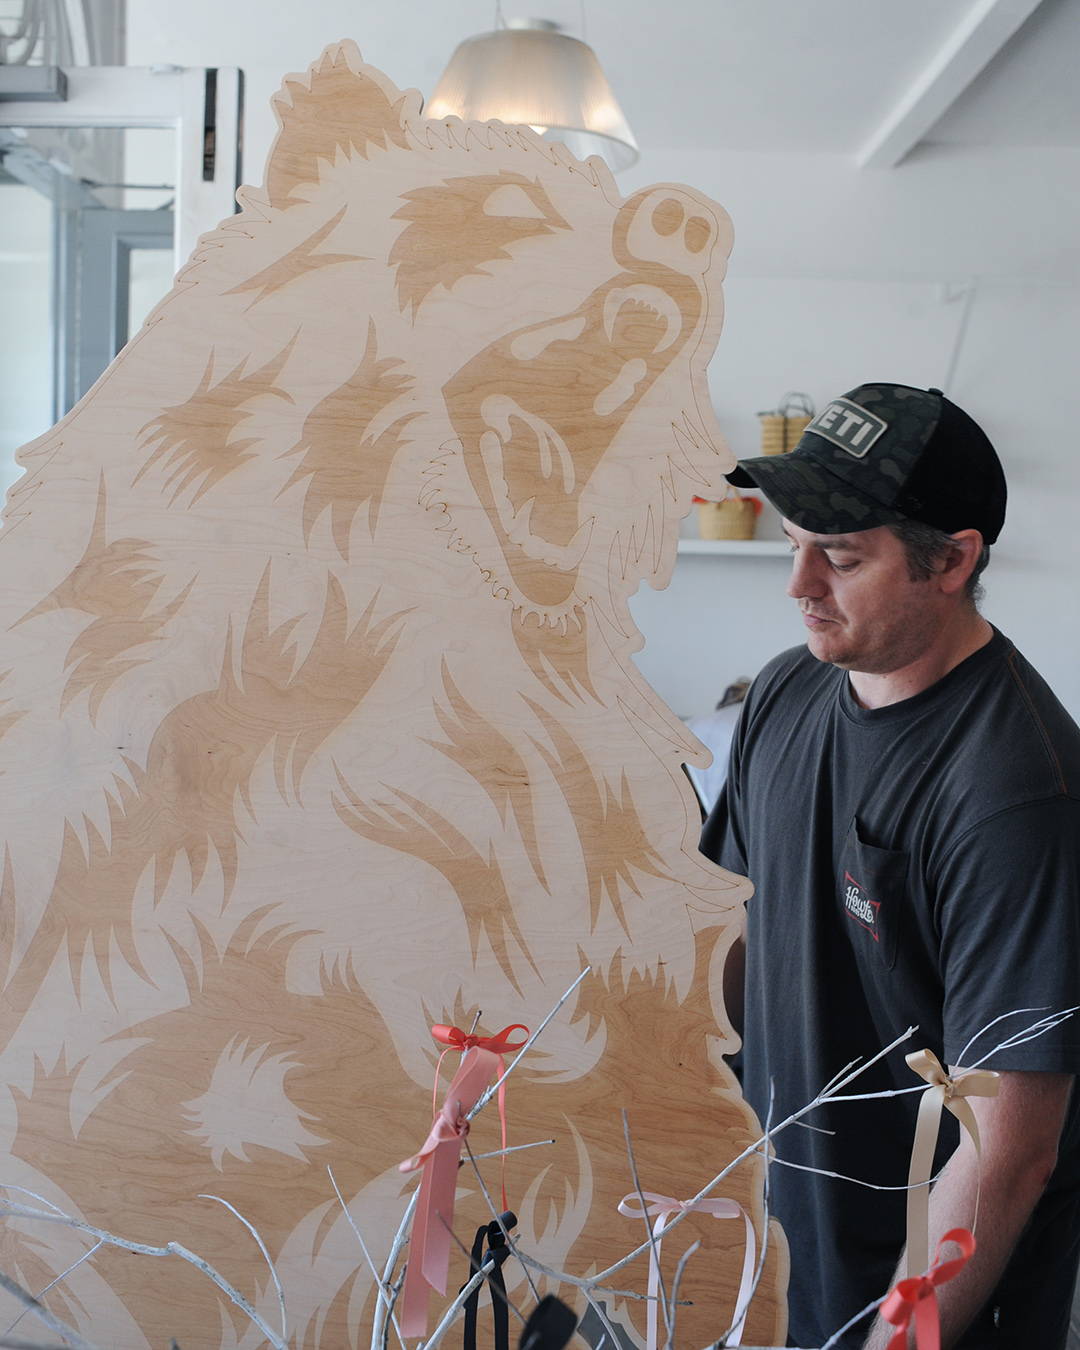 Rowan from Yeti, installing the giant bear in the project space.